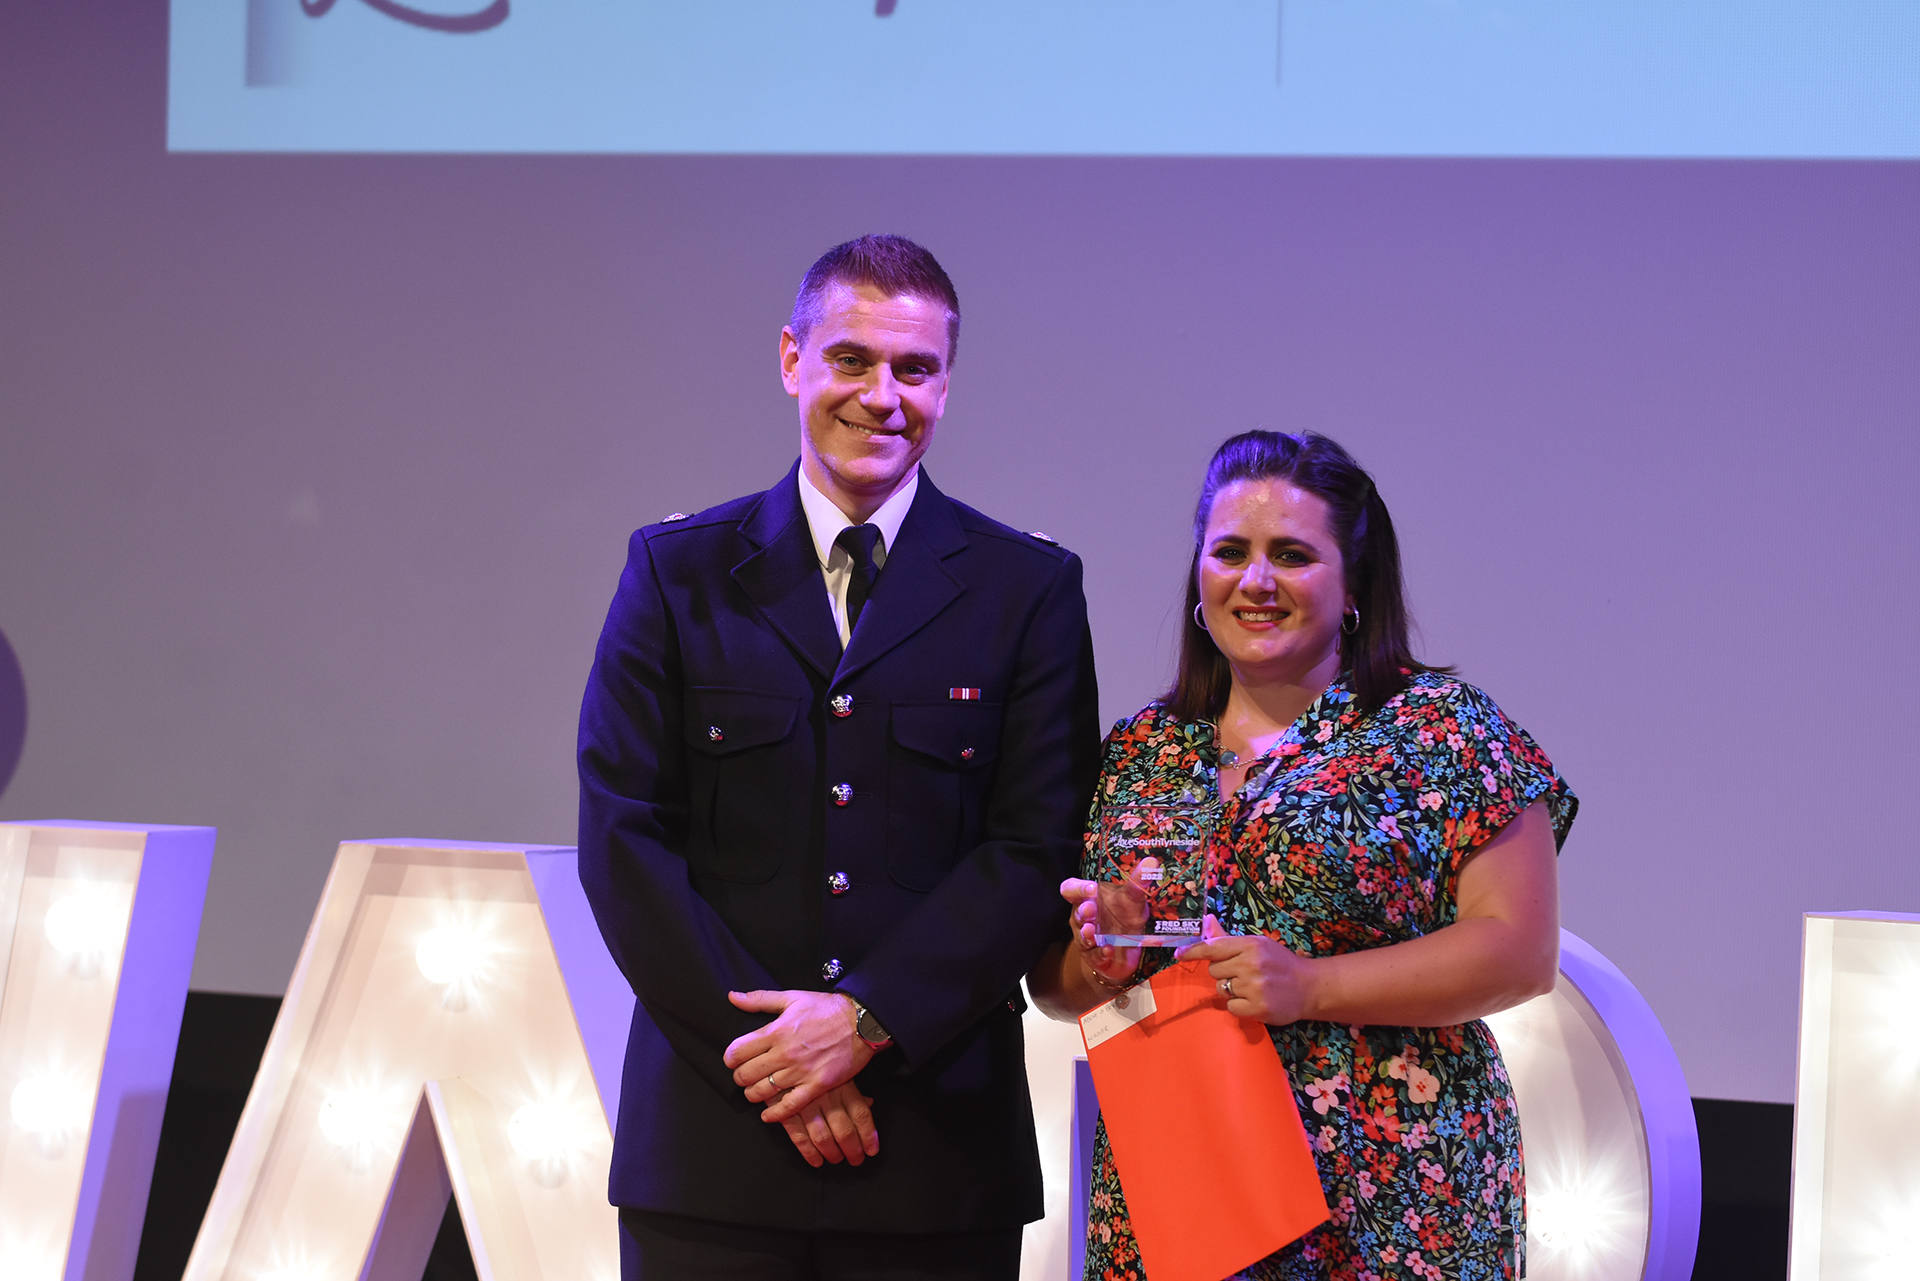 Winner Rebecca Higgins, presented by Barrie Joisce of Northumbria Police